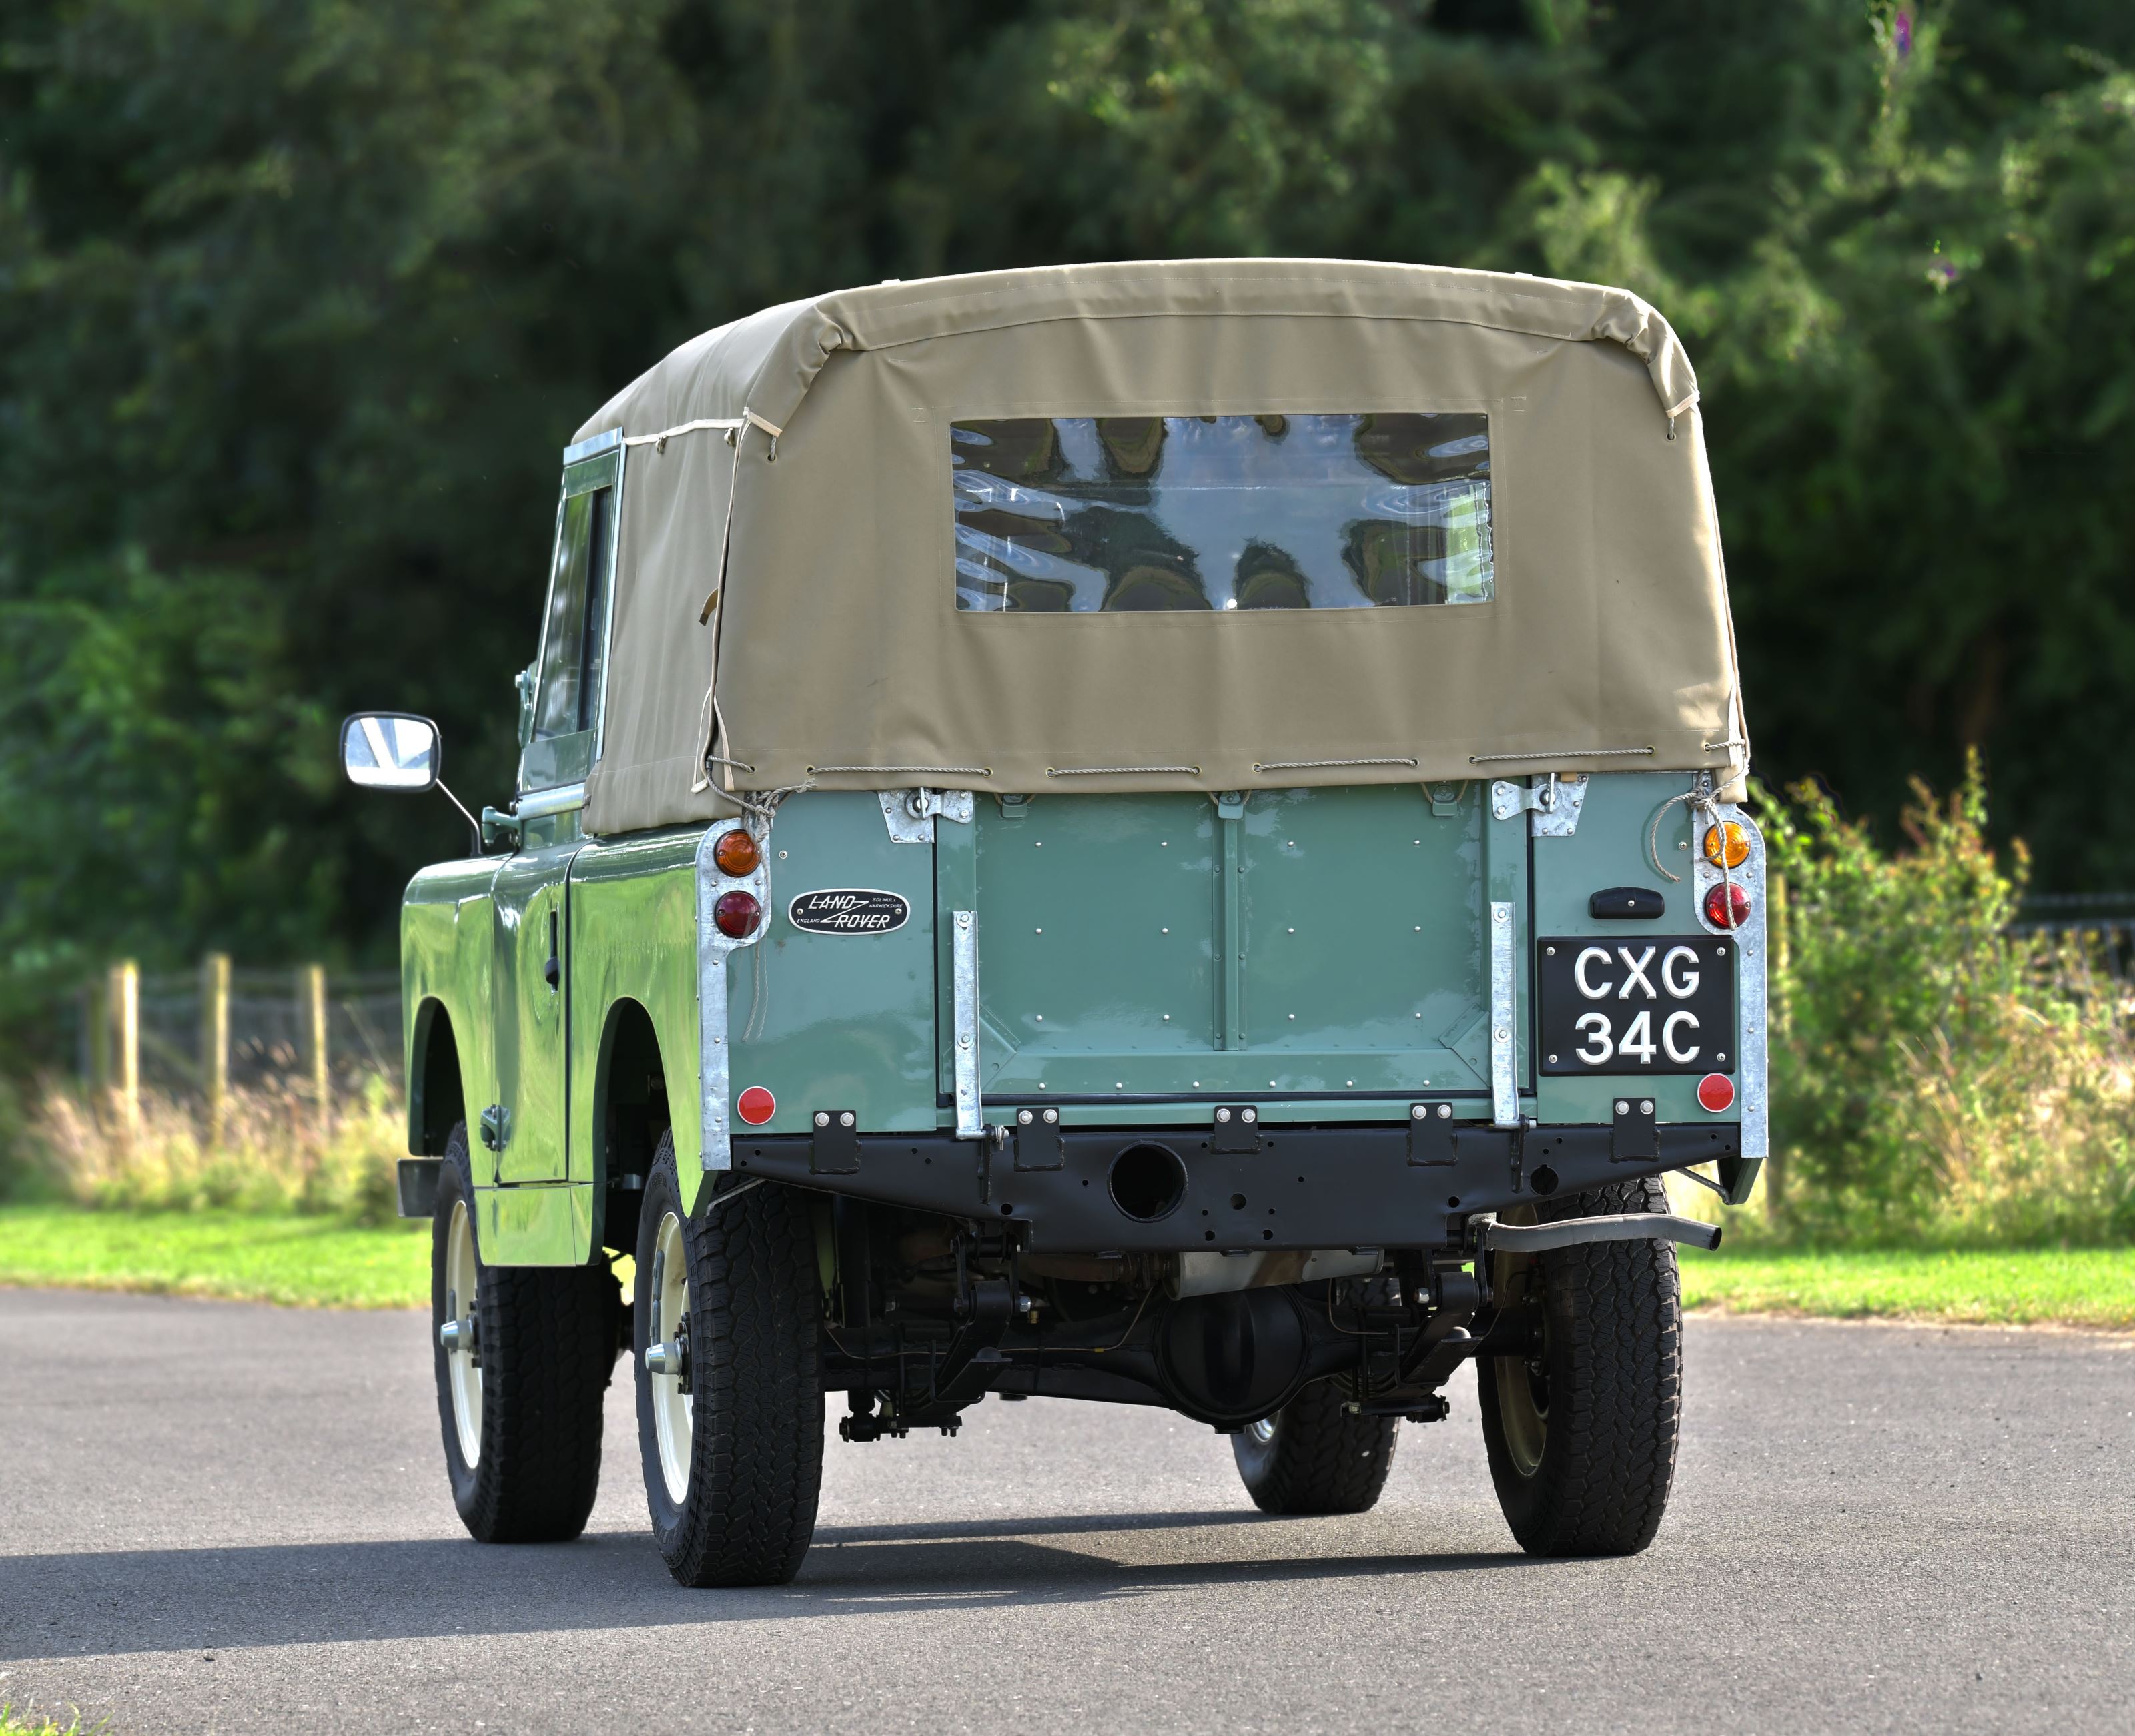 Land rover series 2a swb 88 with overdrive yjapdici4i6a0ztnrb9my